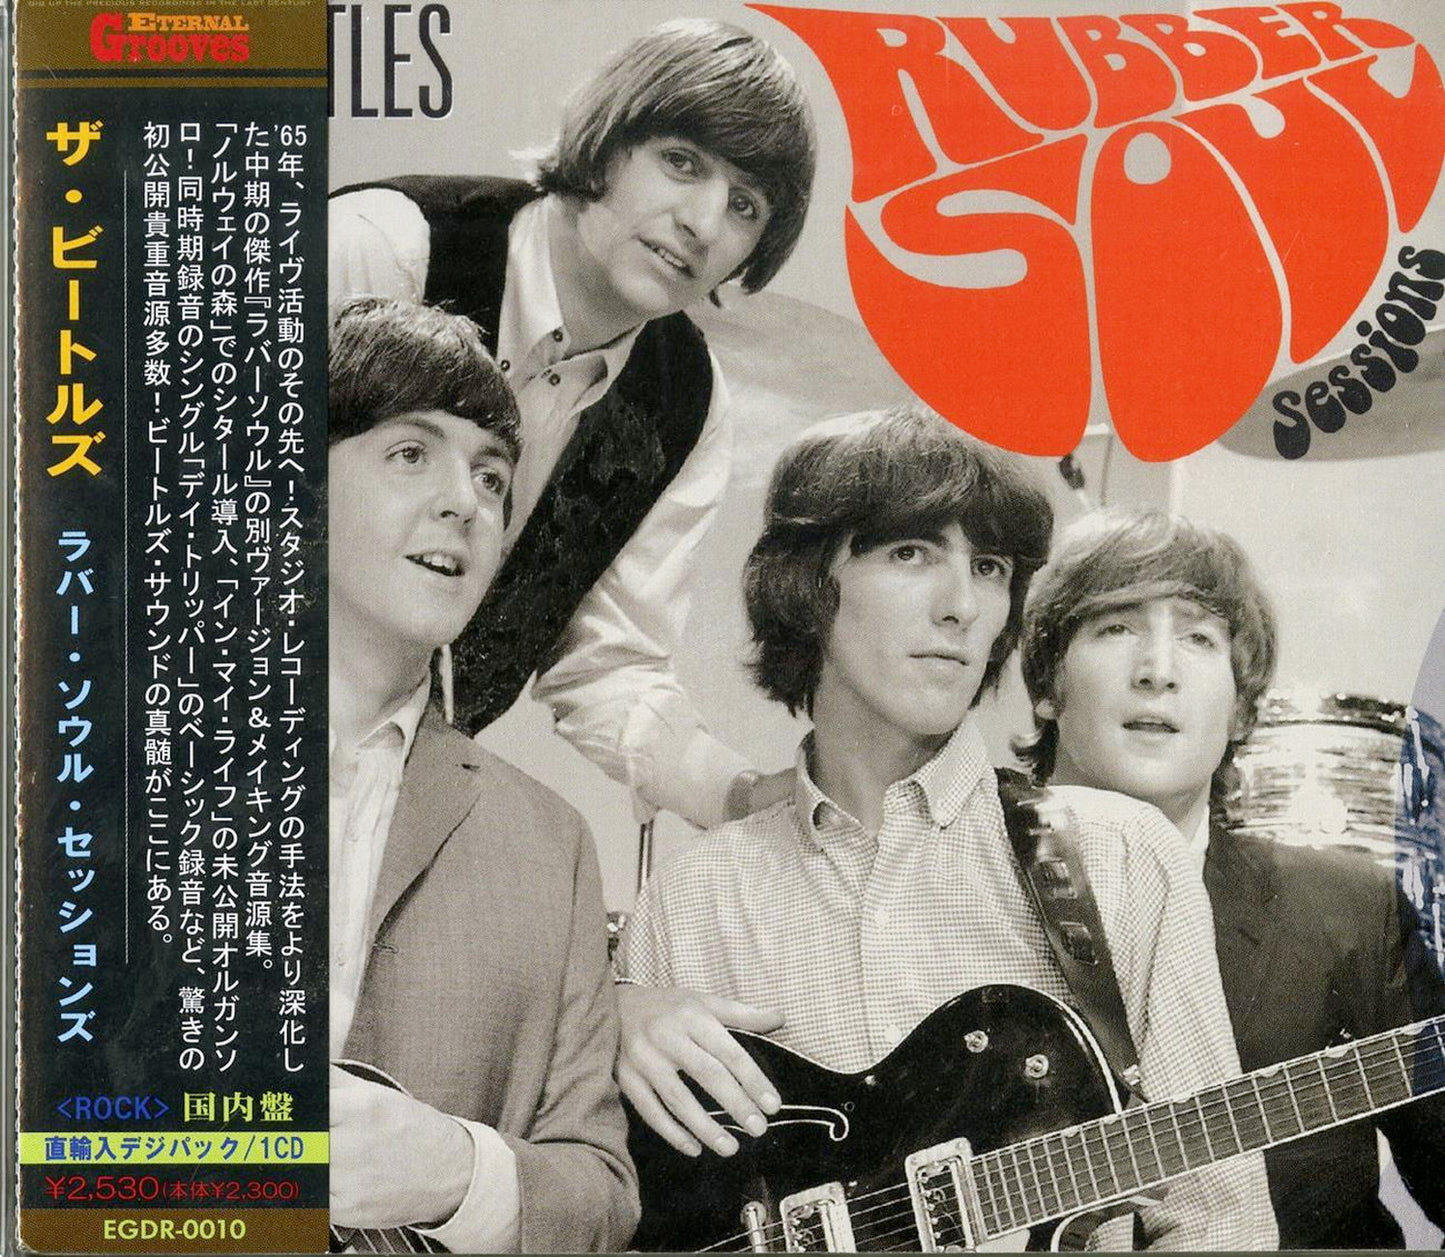 The Beatles - Rubber Soul Sessions - Japan CD